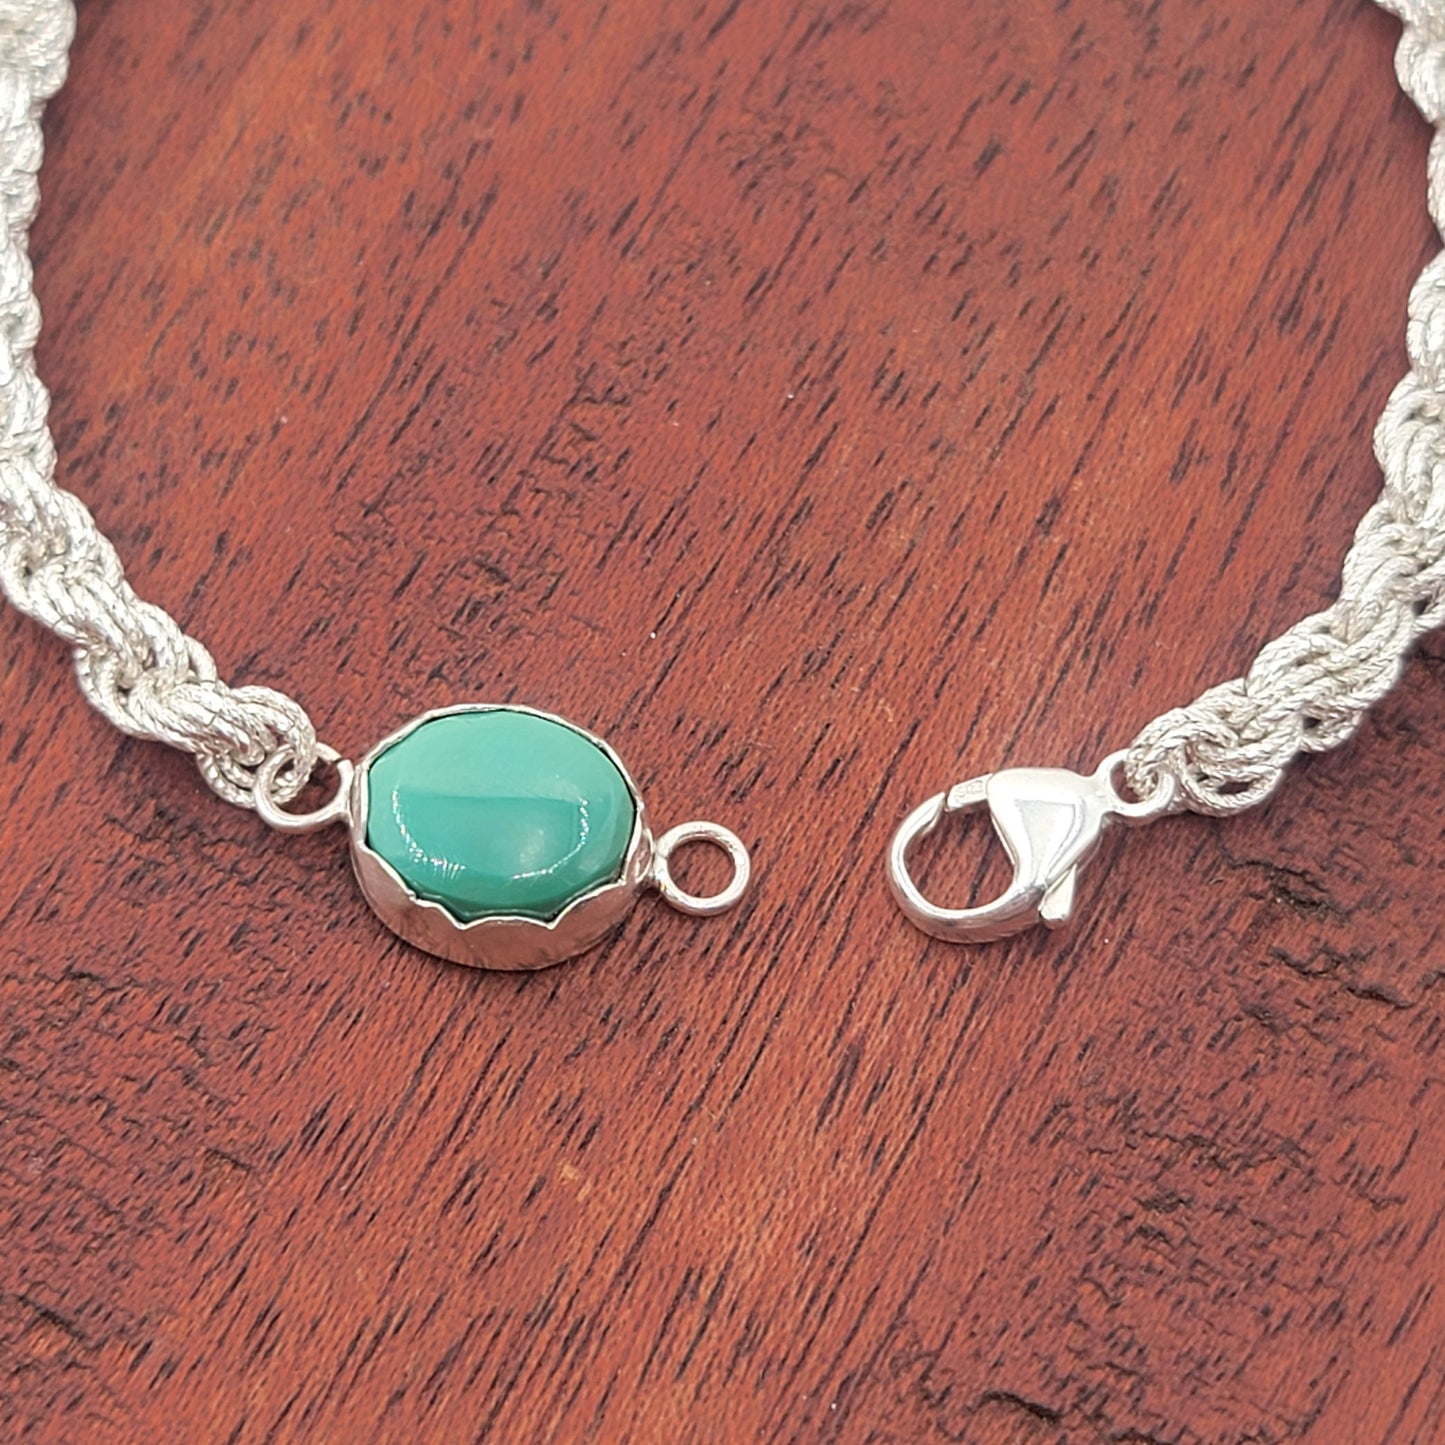 Small Silver Sparkle Chain Bracelet with Turquoise